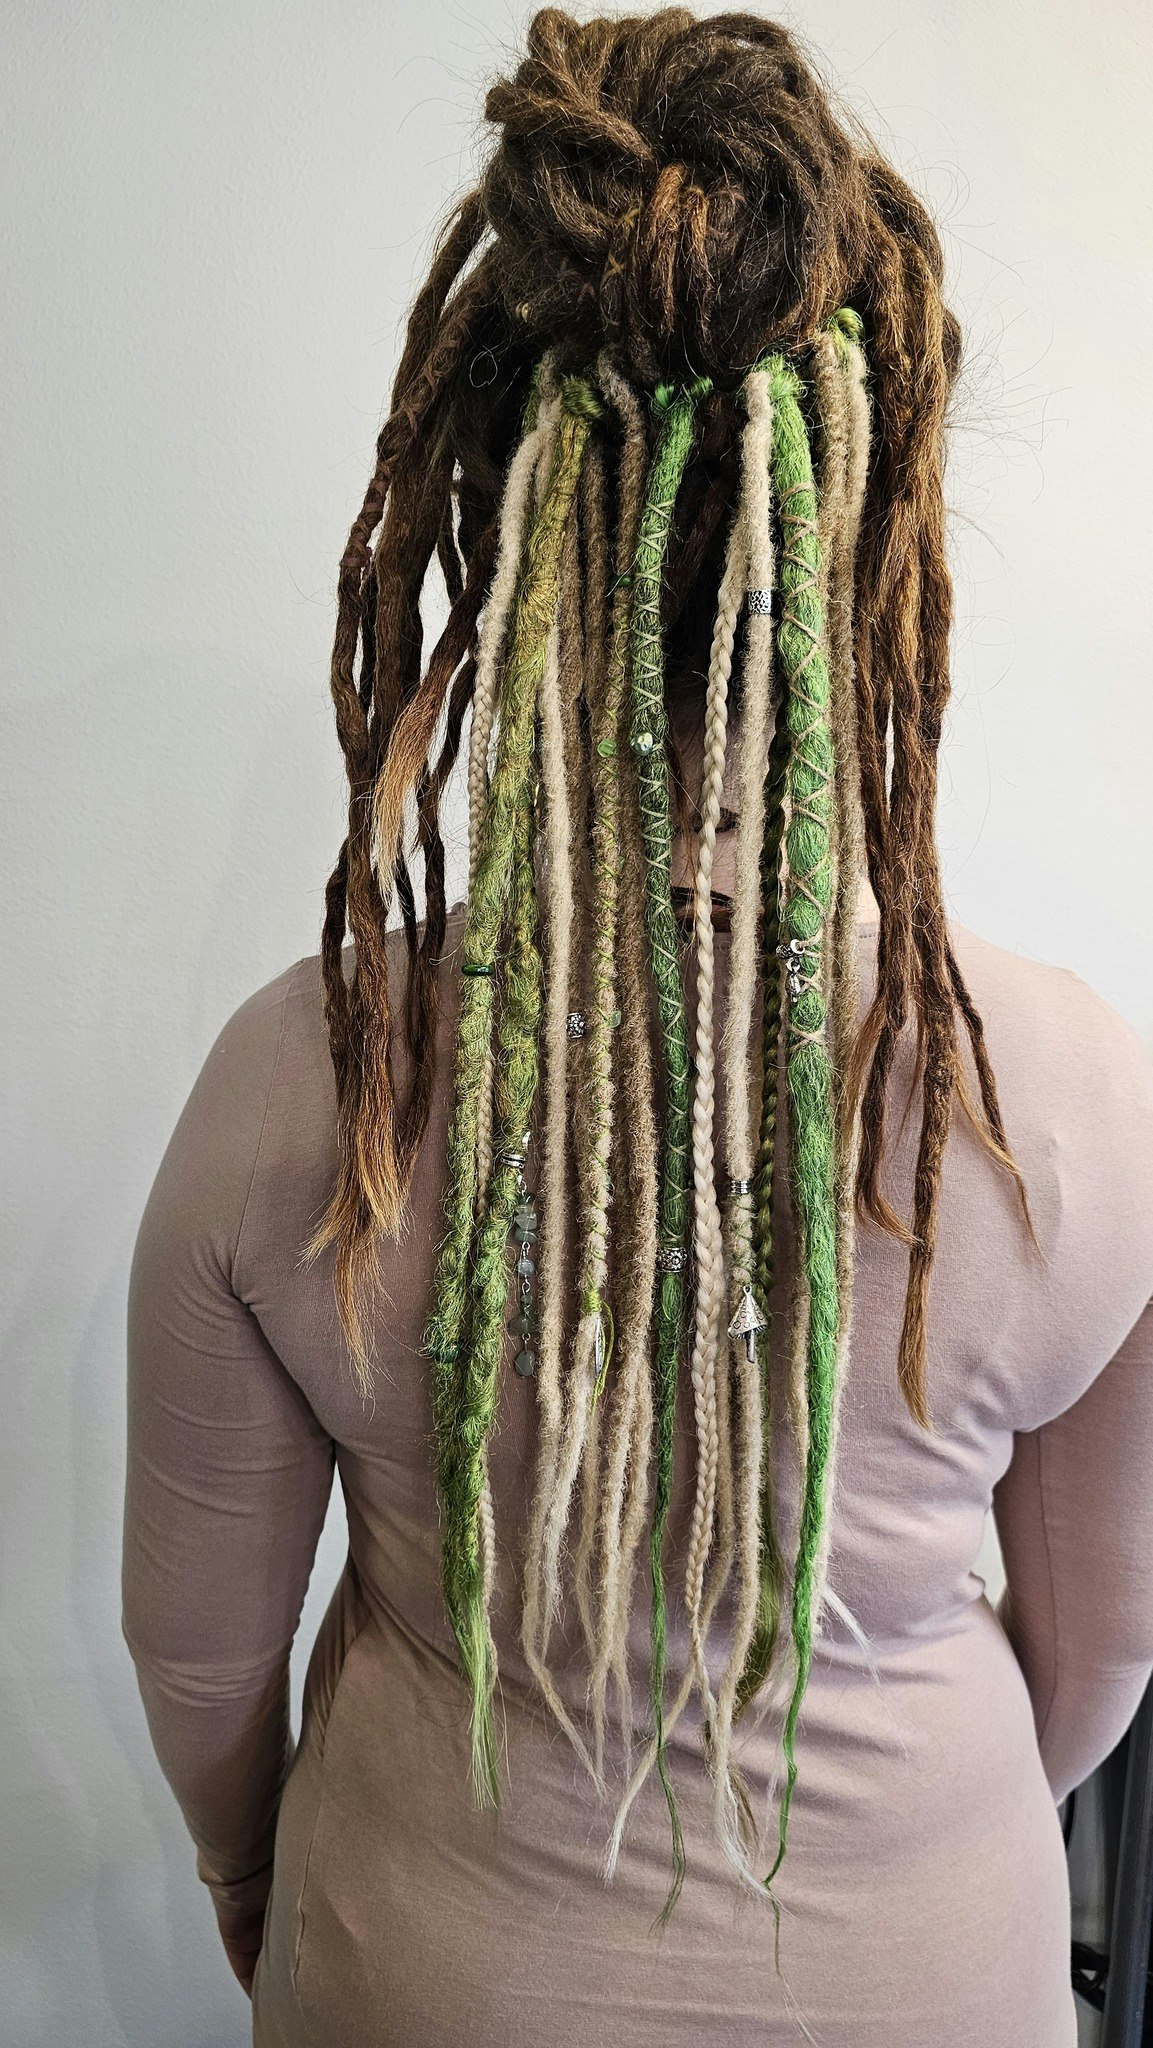 "Midsommaräng" Dreads Ponytail Extensions